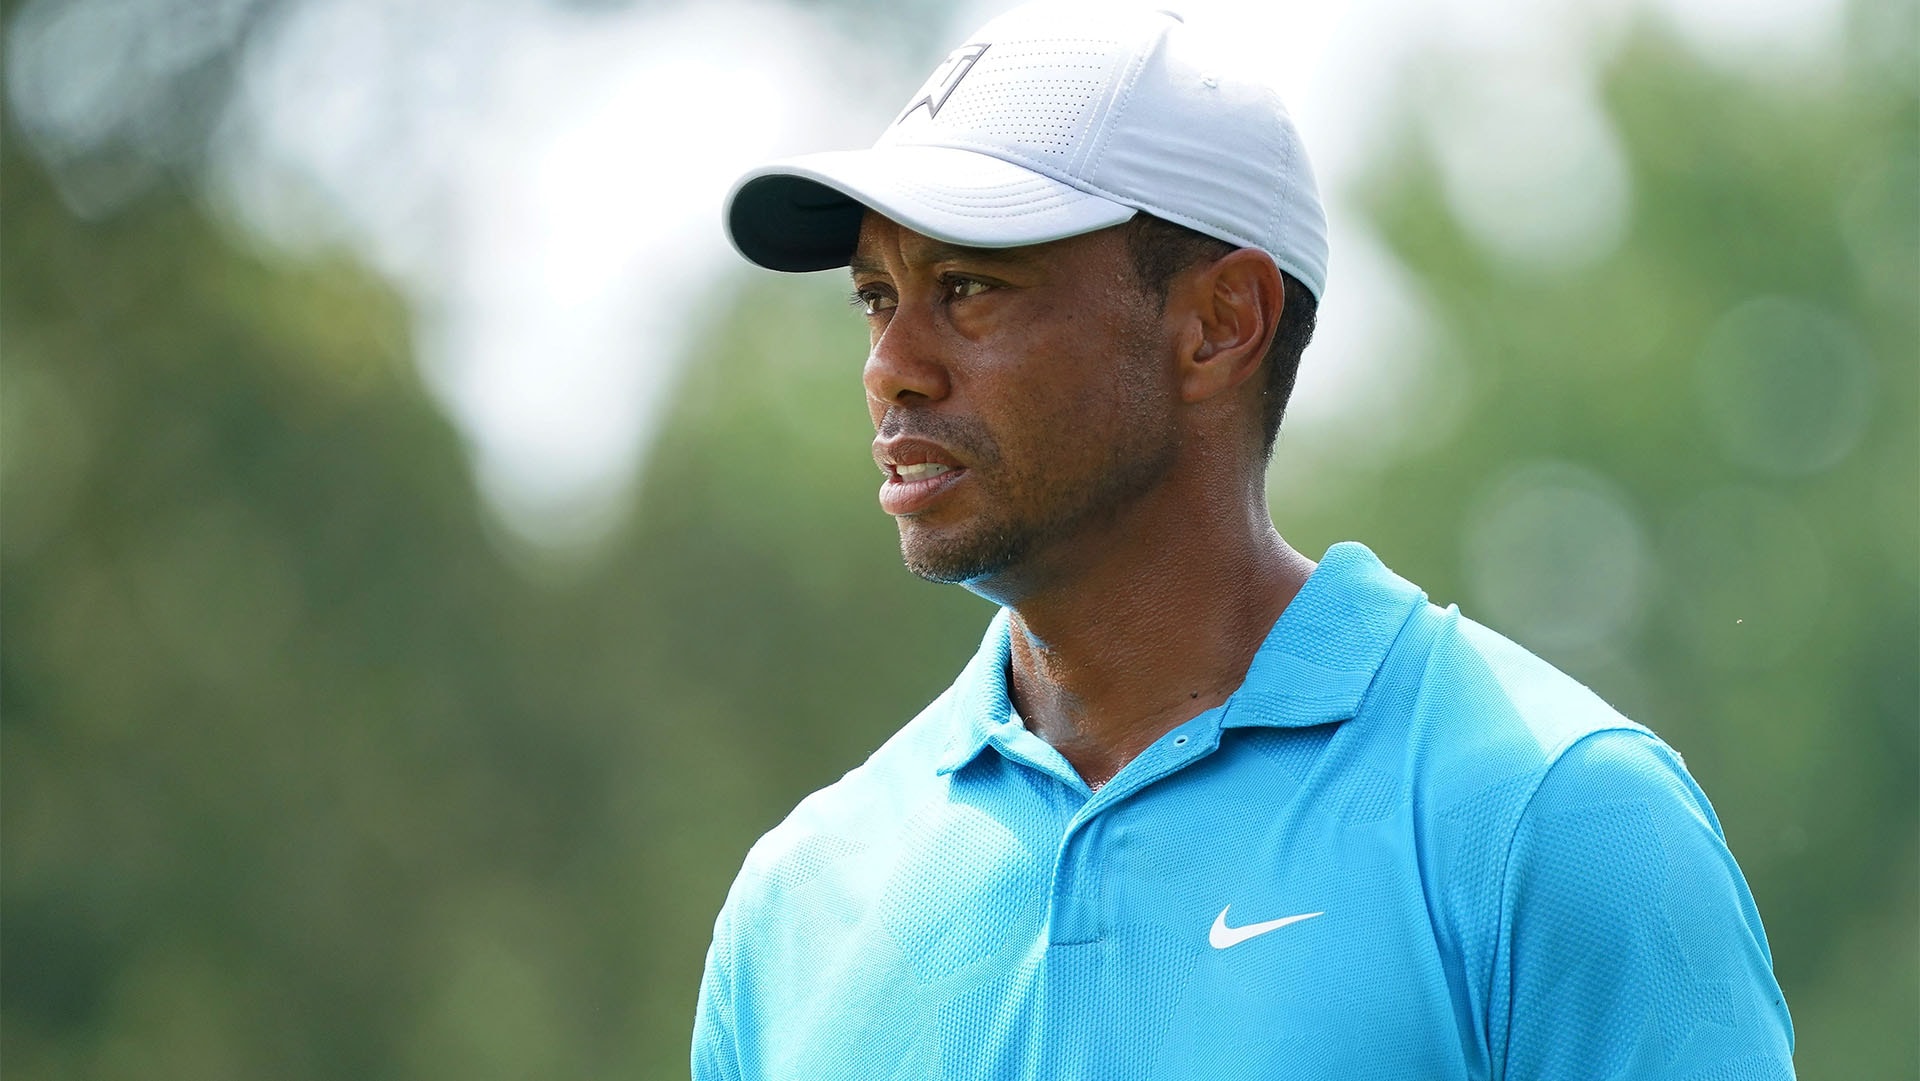 TT Postscript: Woods Shoots 3-over 73 in Opening Round of PGA Tour’s BMW Championship